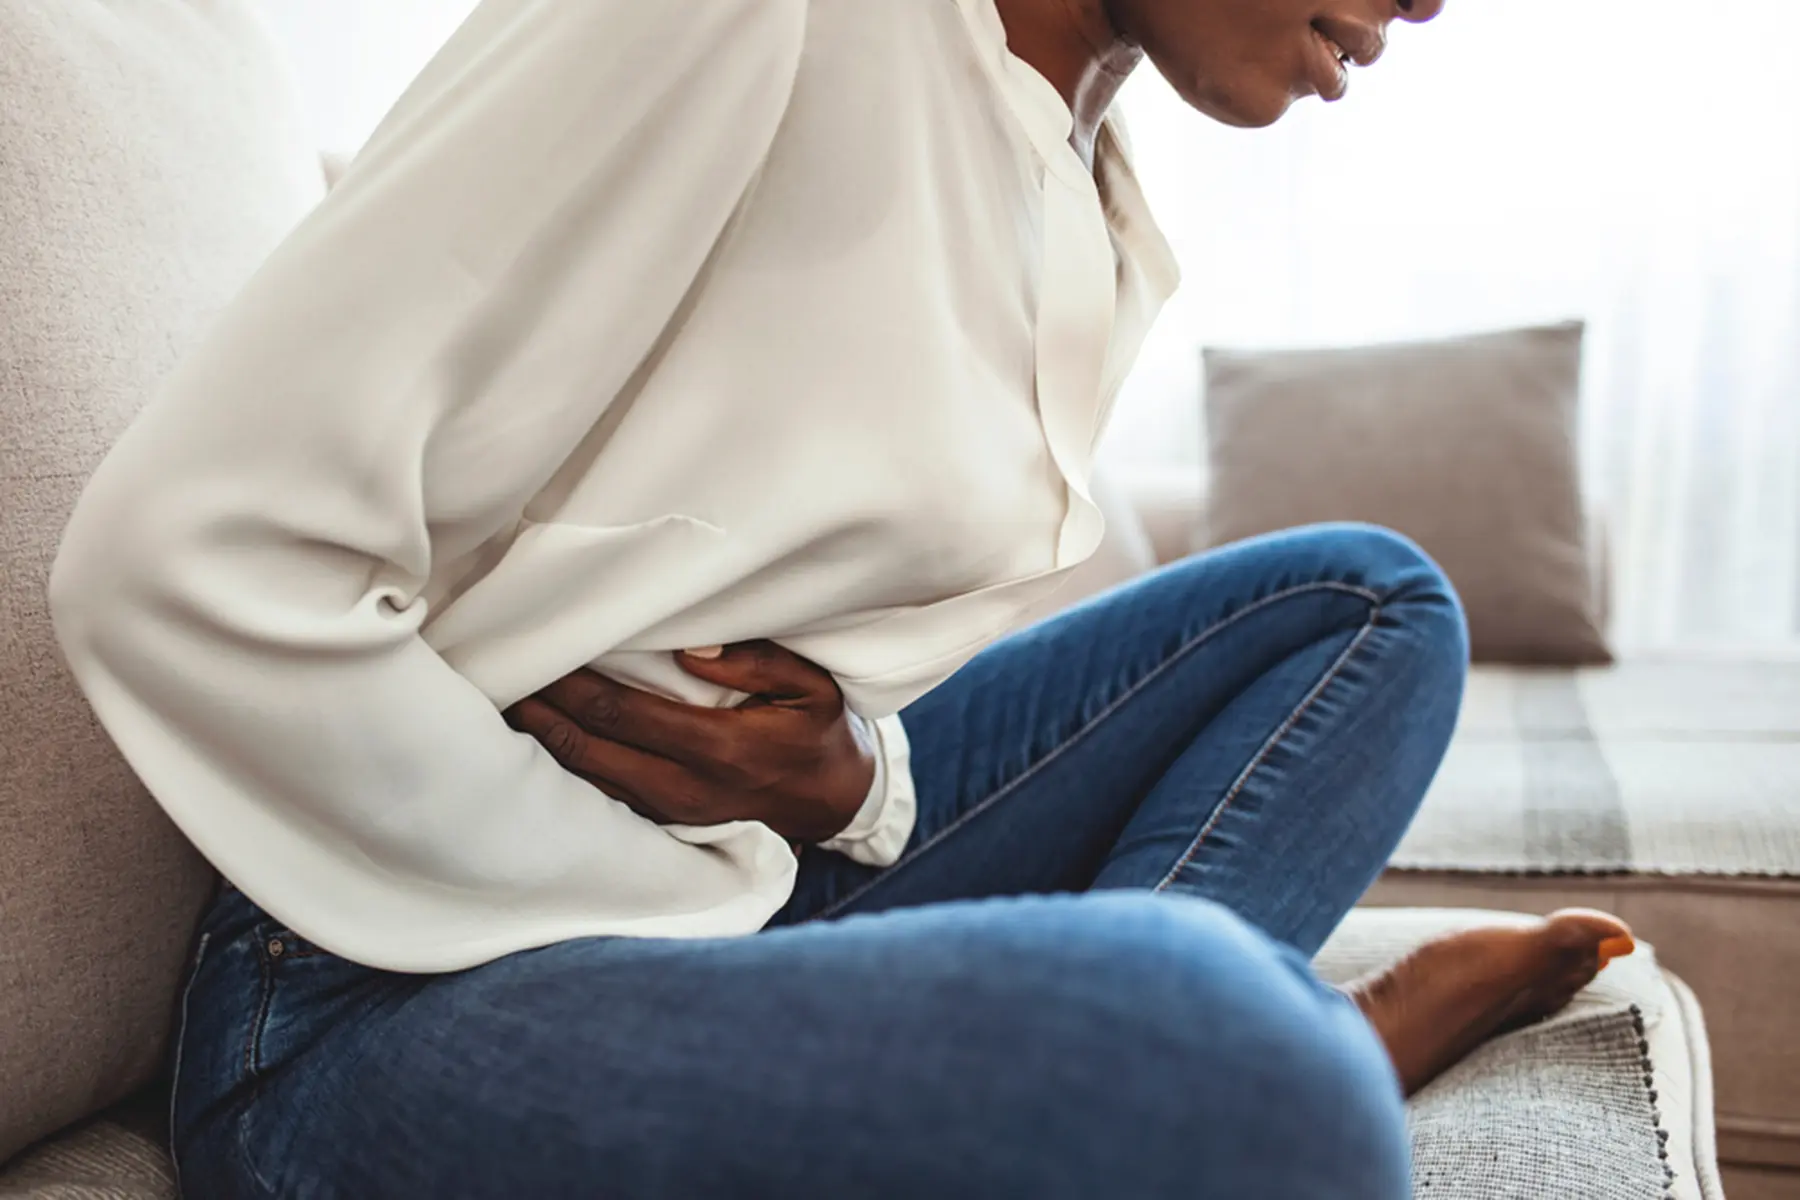 Lower Abdomen Pain in Females: Causes and Relief